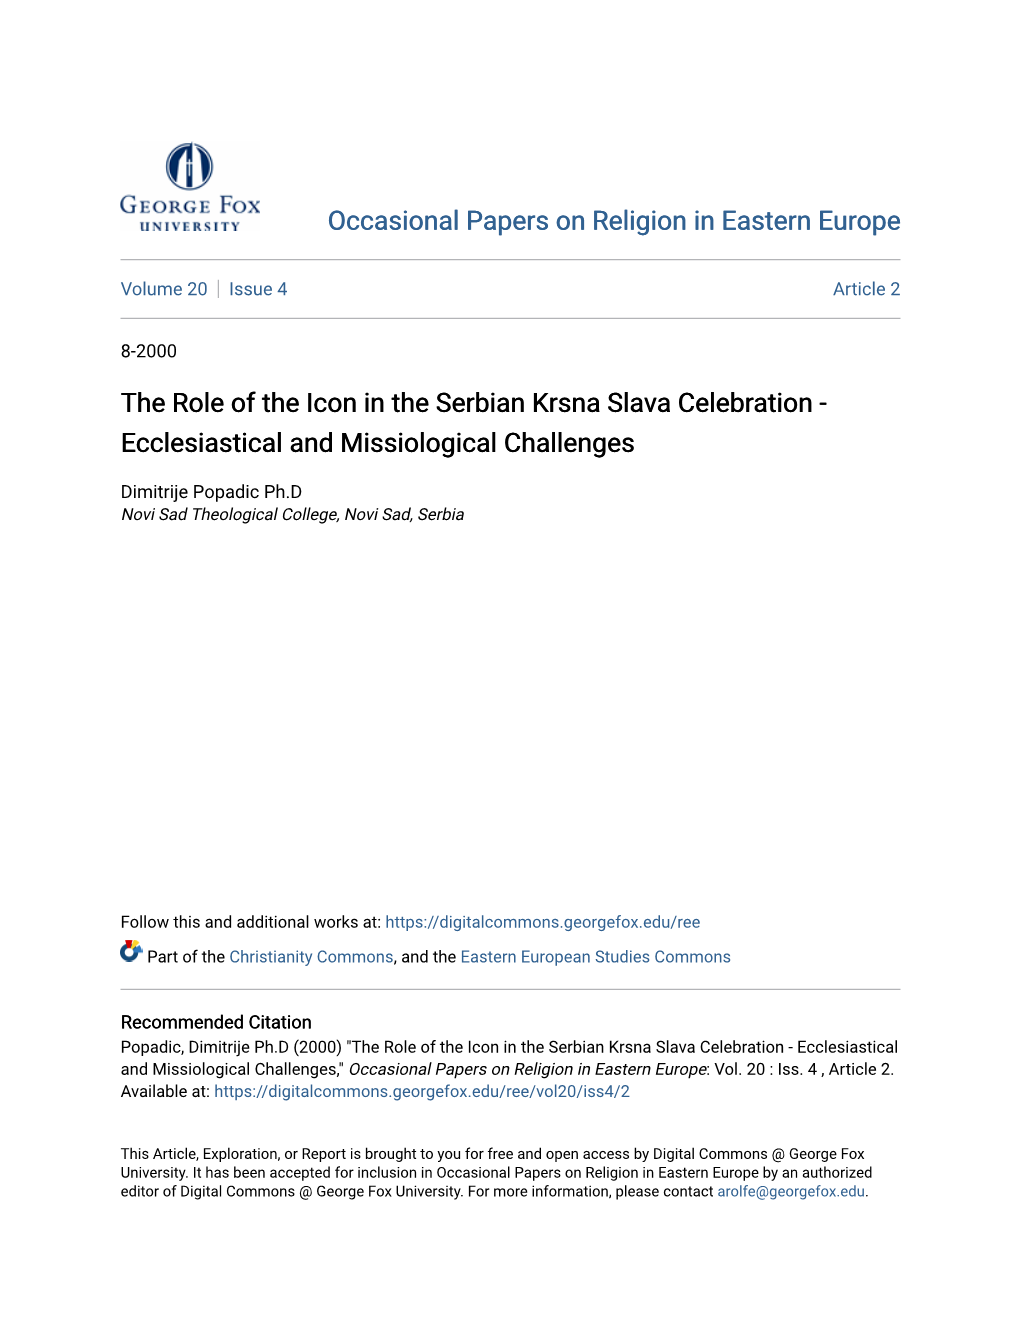 The Role of the Icon in the Serbian Krsna Slava Celebration - Ecclesiastical and Missiological Challenges